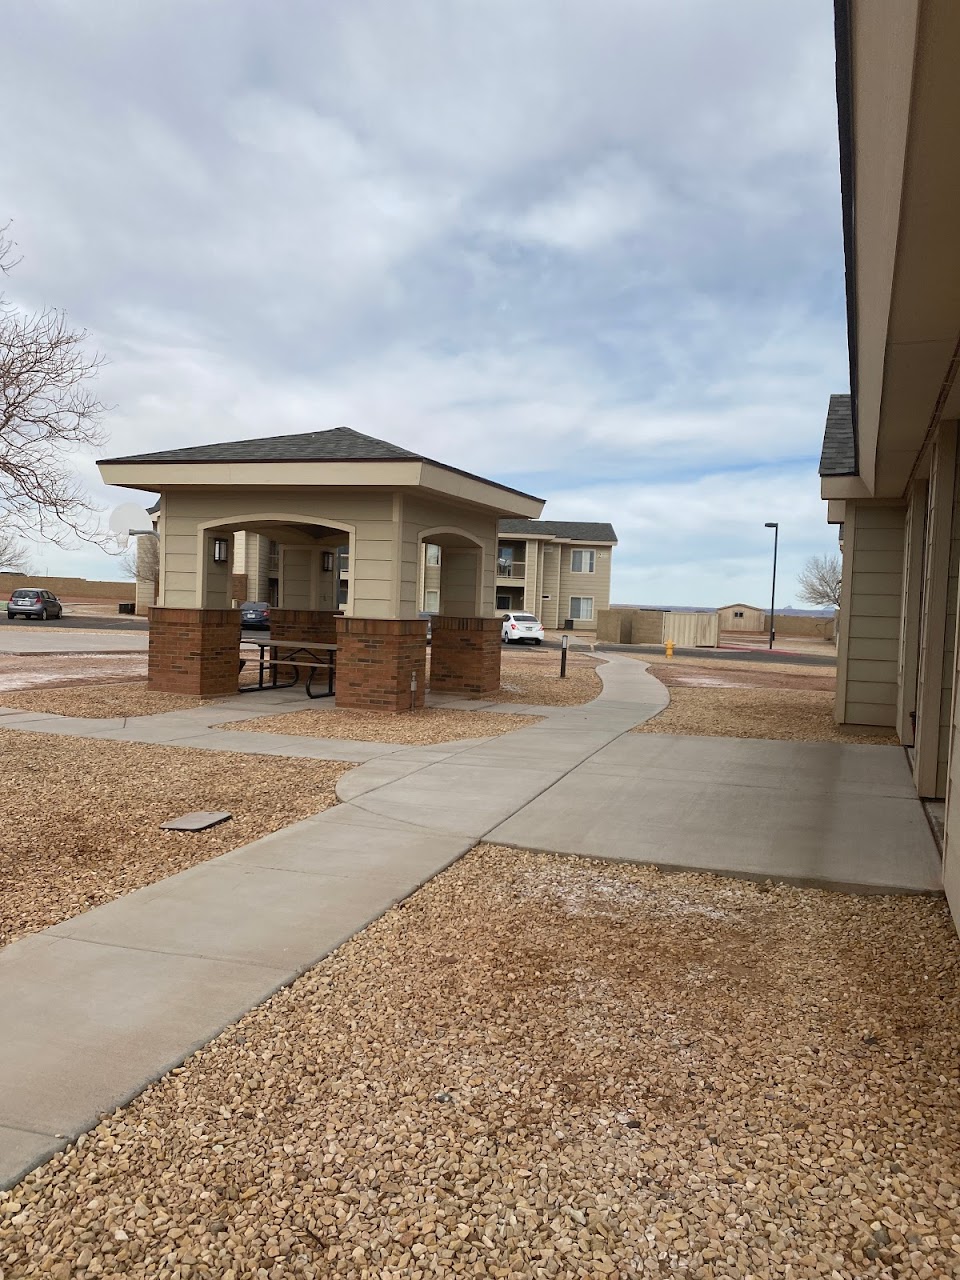 Photo of WINSLOW CROSSING. Affordable housing located at 1800 W FLEMING ST WINSLOW, AZ 86047